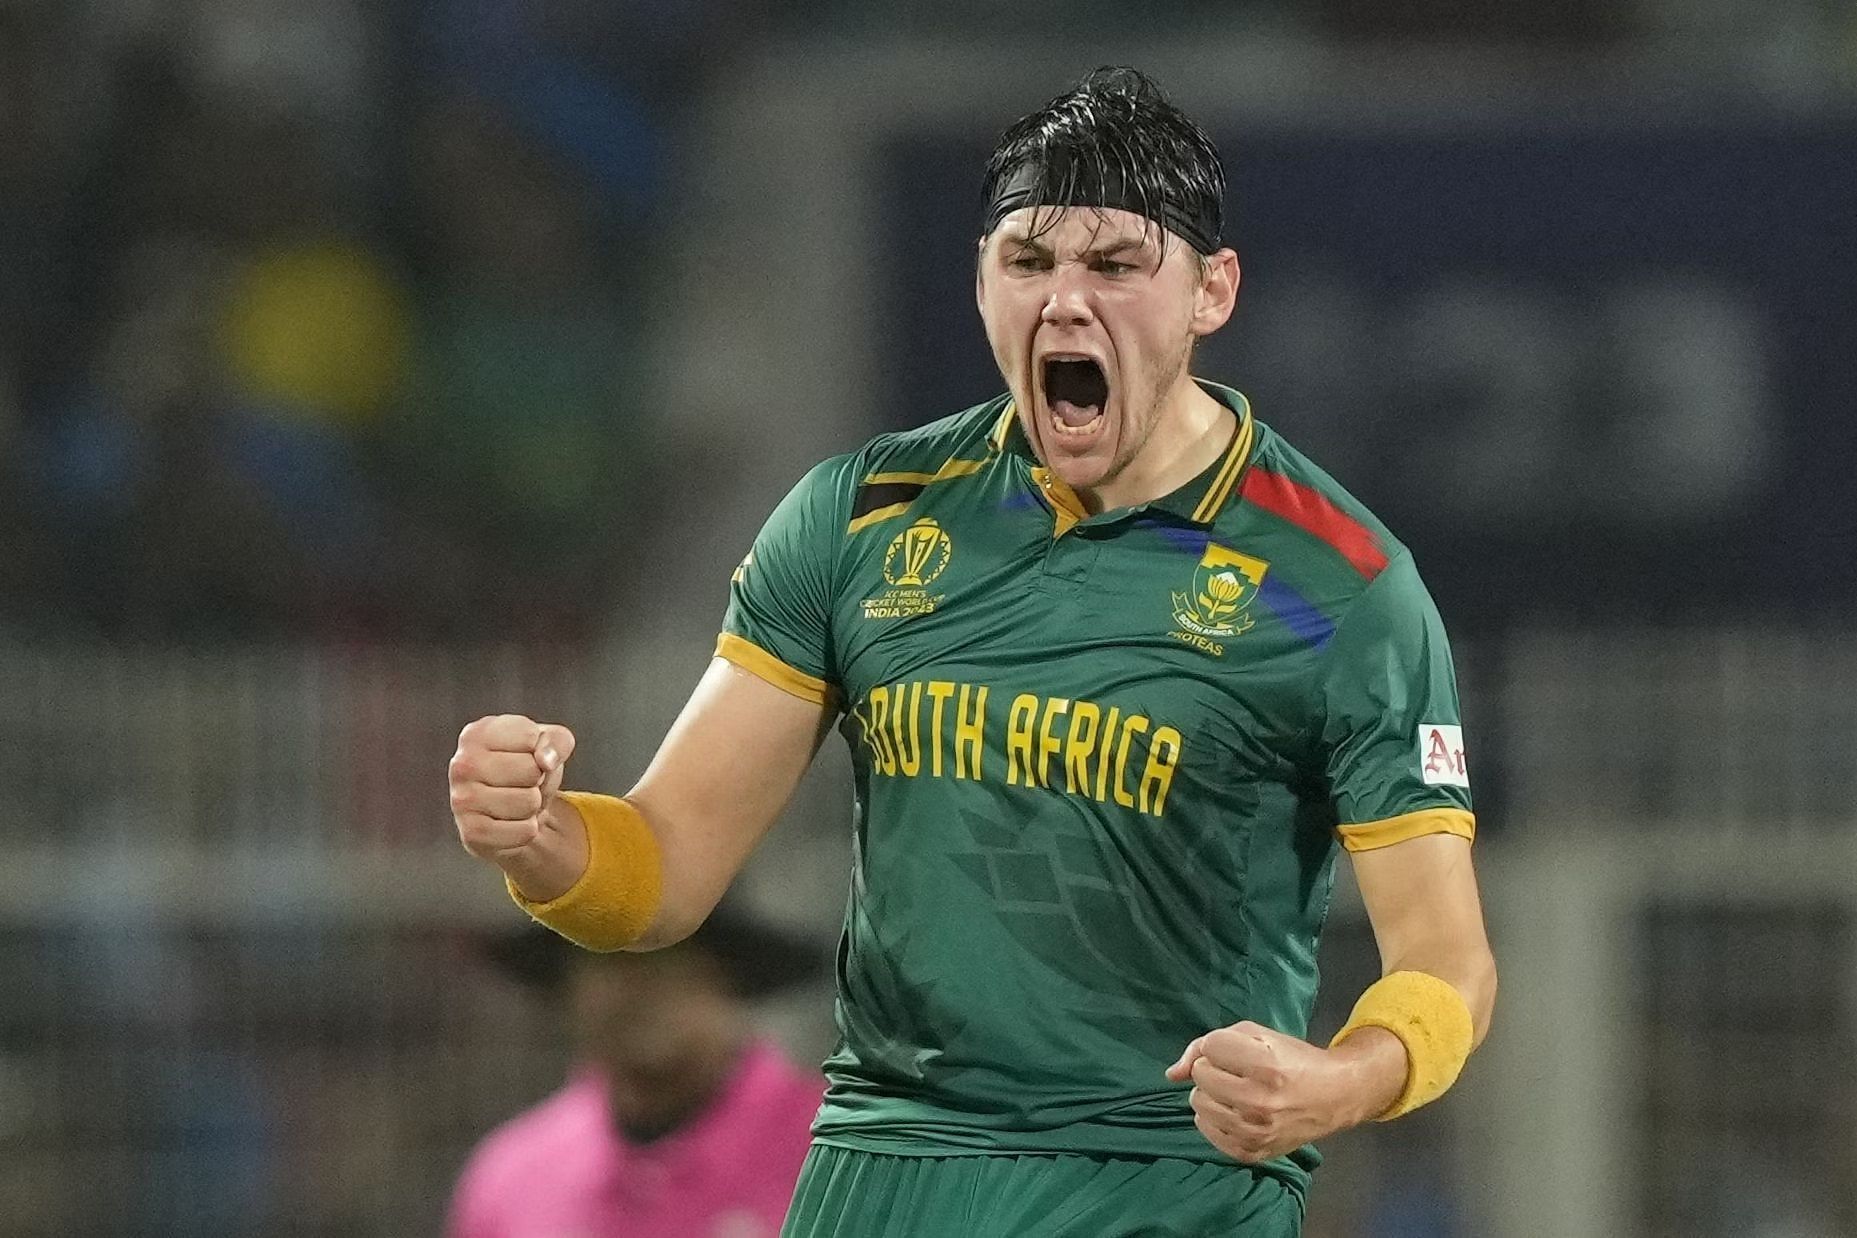 Gerald Coetzee excelled for South Africa in the 2023 ODI World Cup. [P/C: AP]